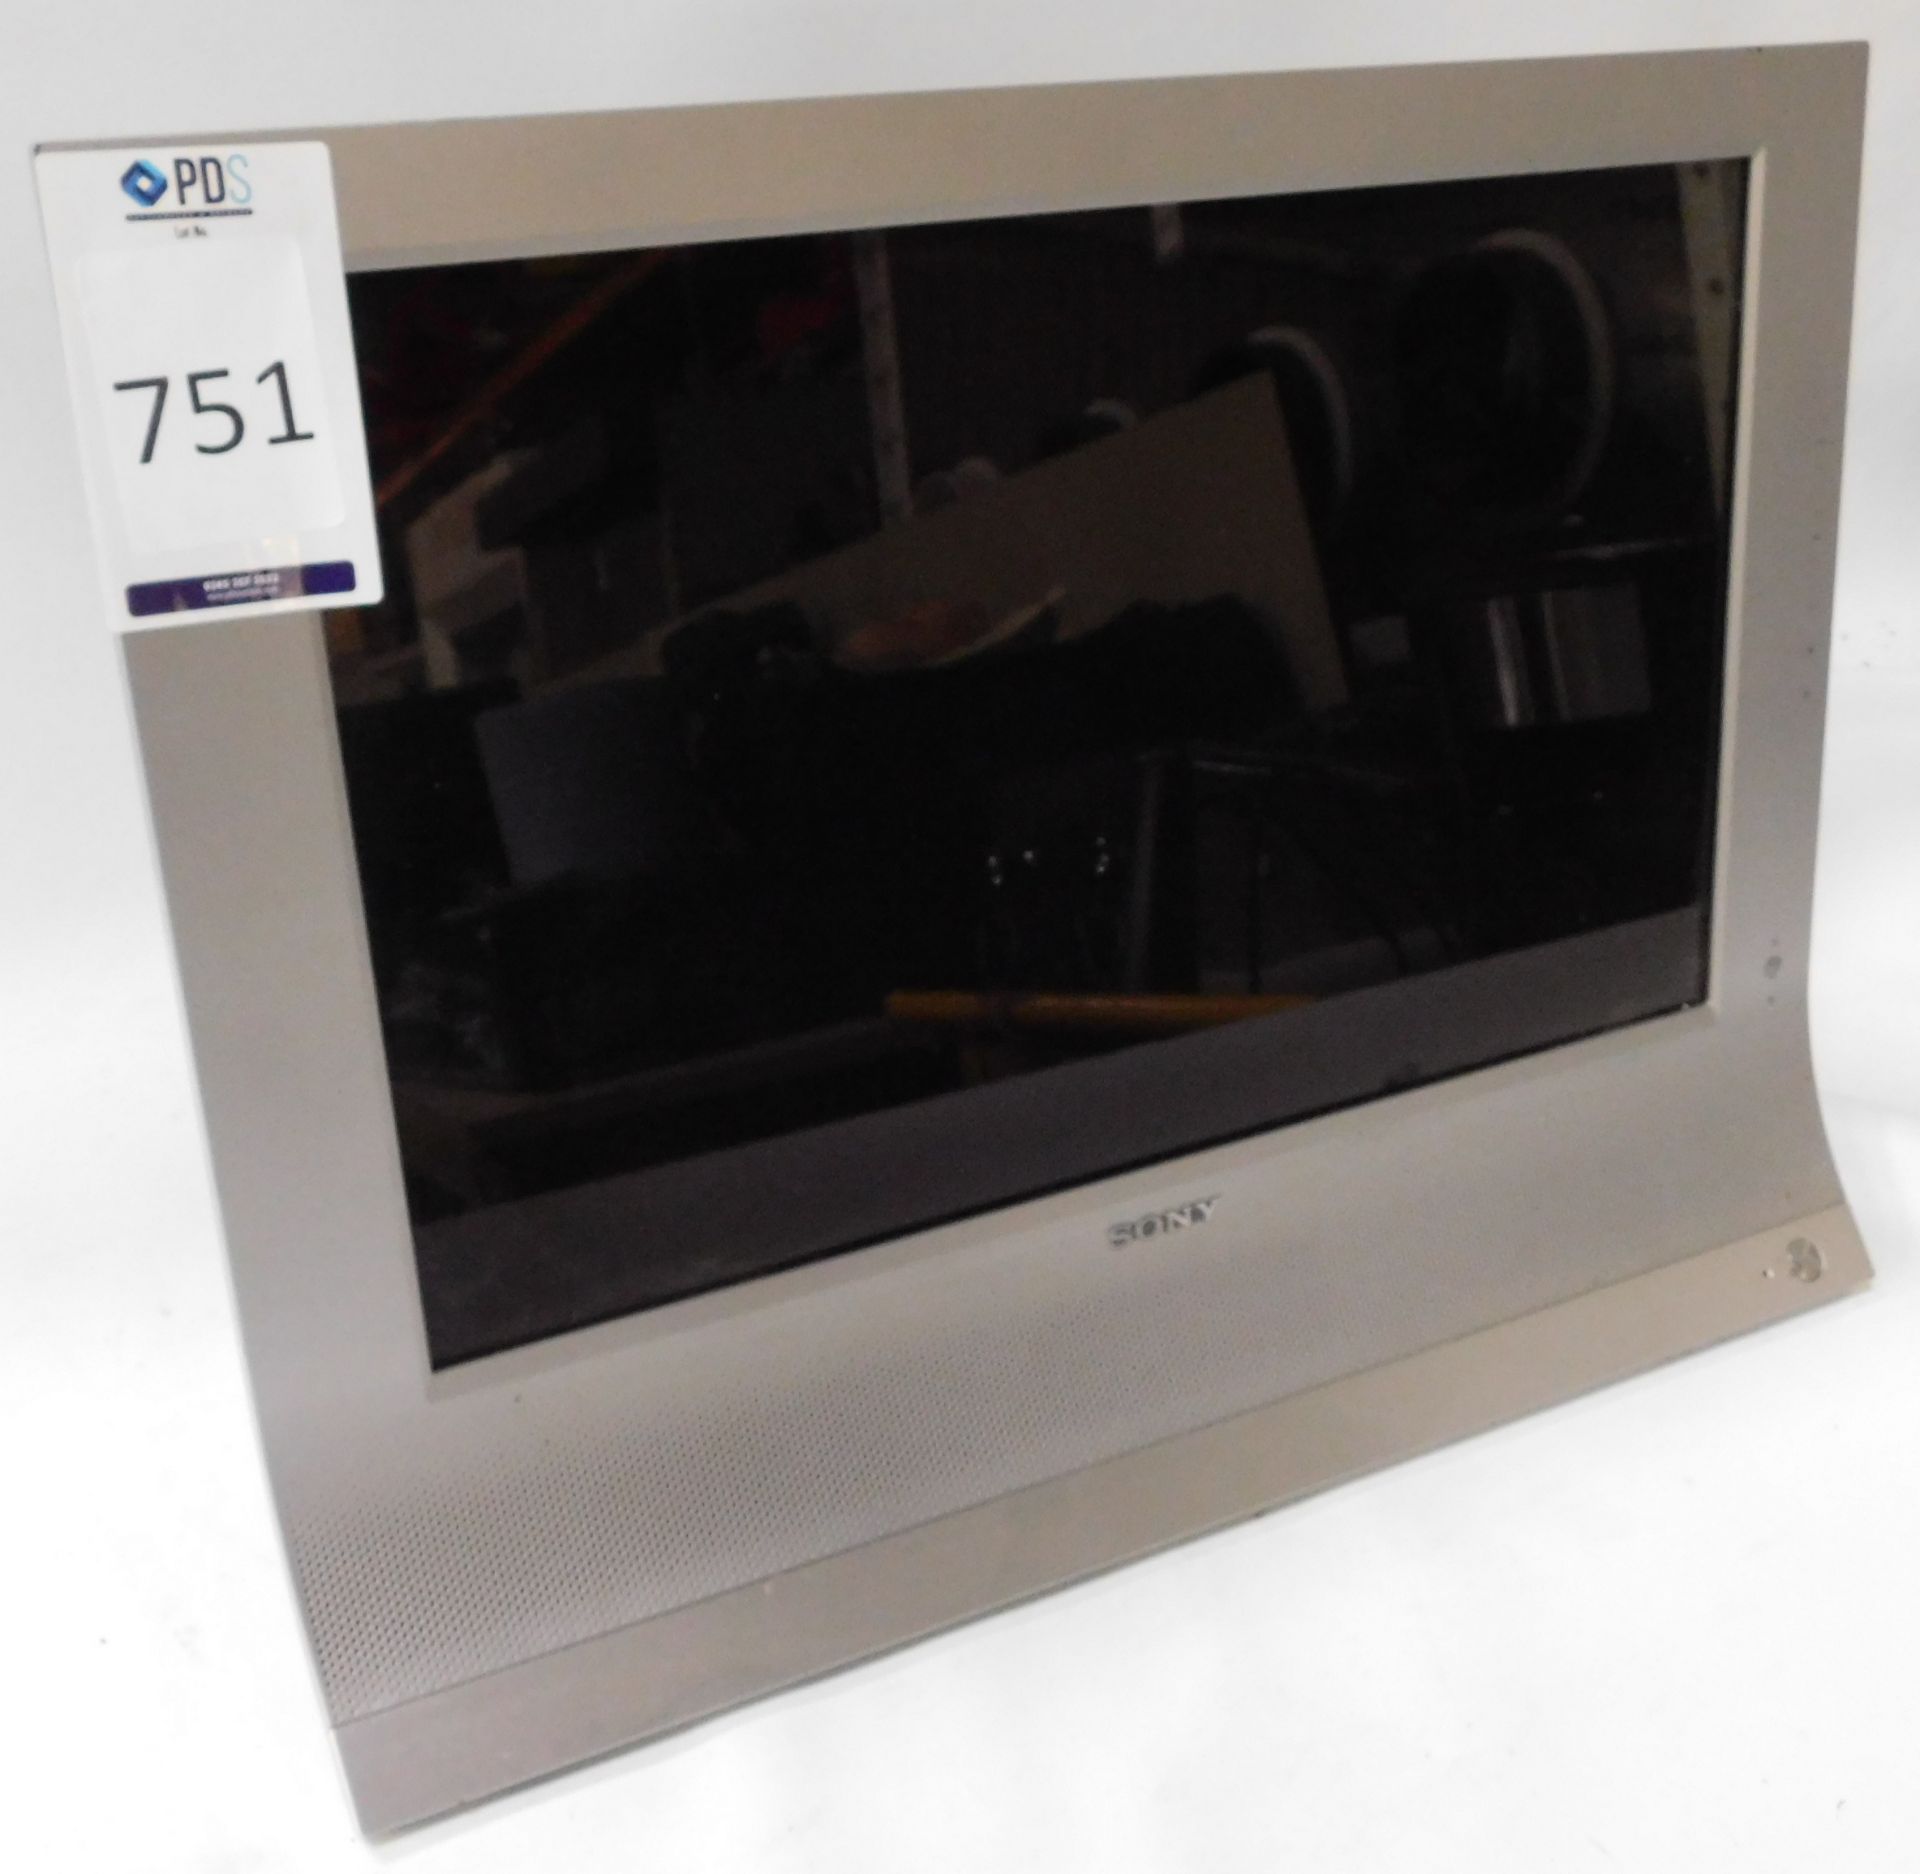 Sony MFM-HT205 Medical Monitor, Serial Number 6304092 (Location: Brentwood. Please Refer to